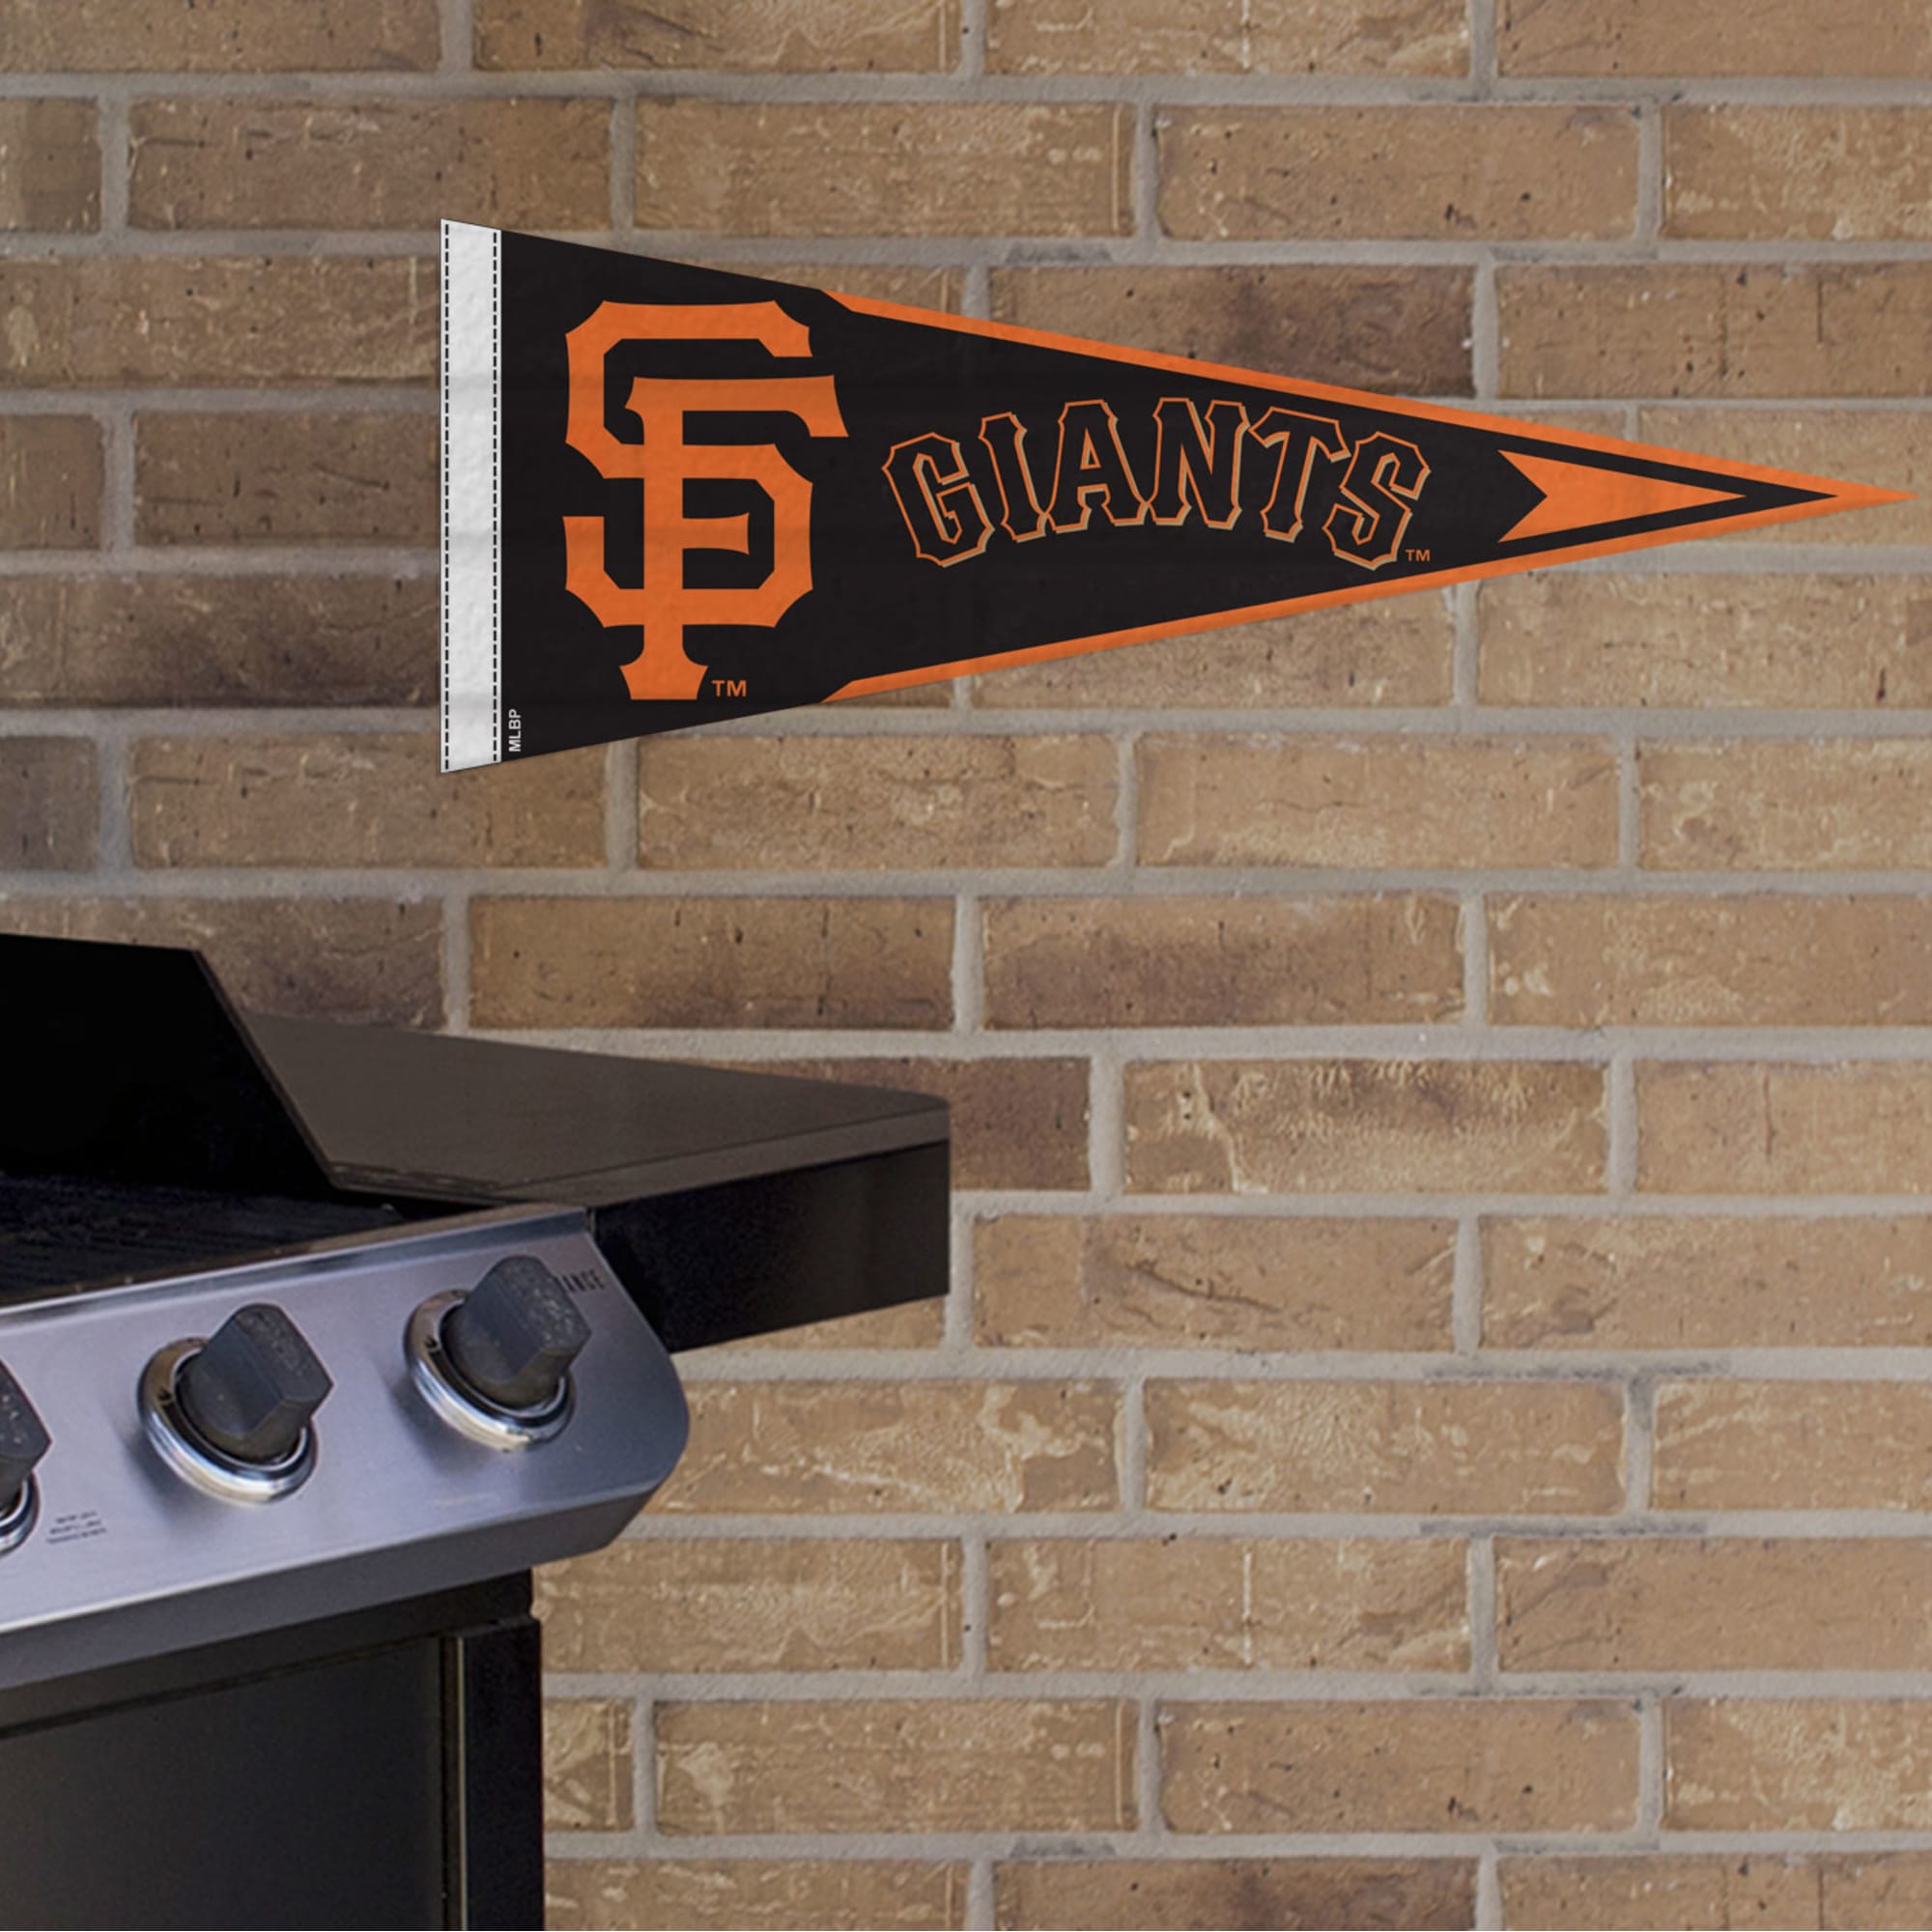 San Francisco Giants: Pennant - Officially Licensed MLB Outdoor Graphic 24.0"W x 9.0"H by Fathead | Wood/Aluminum